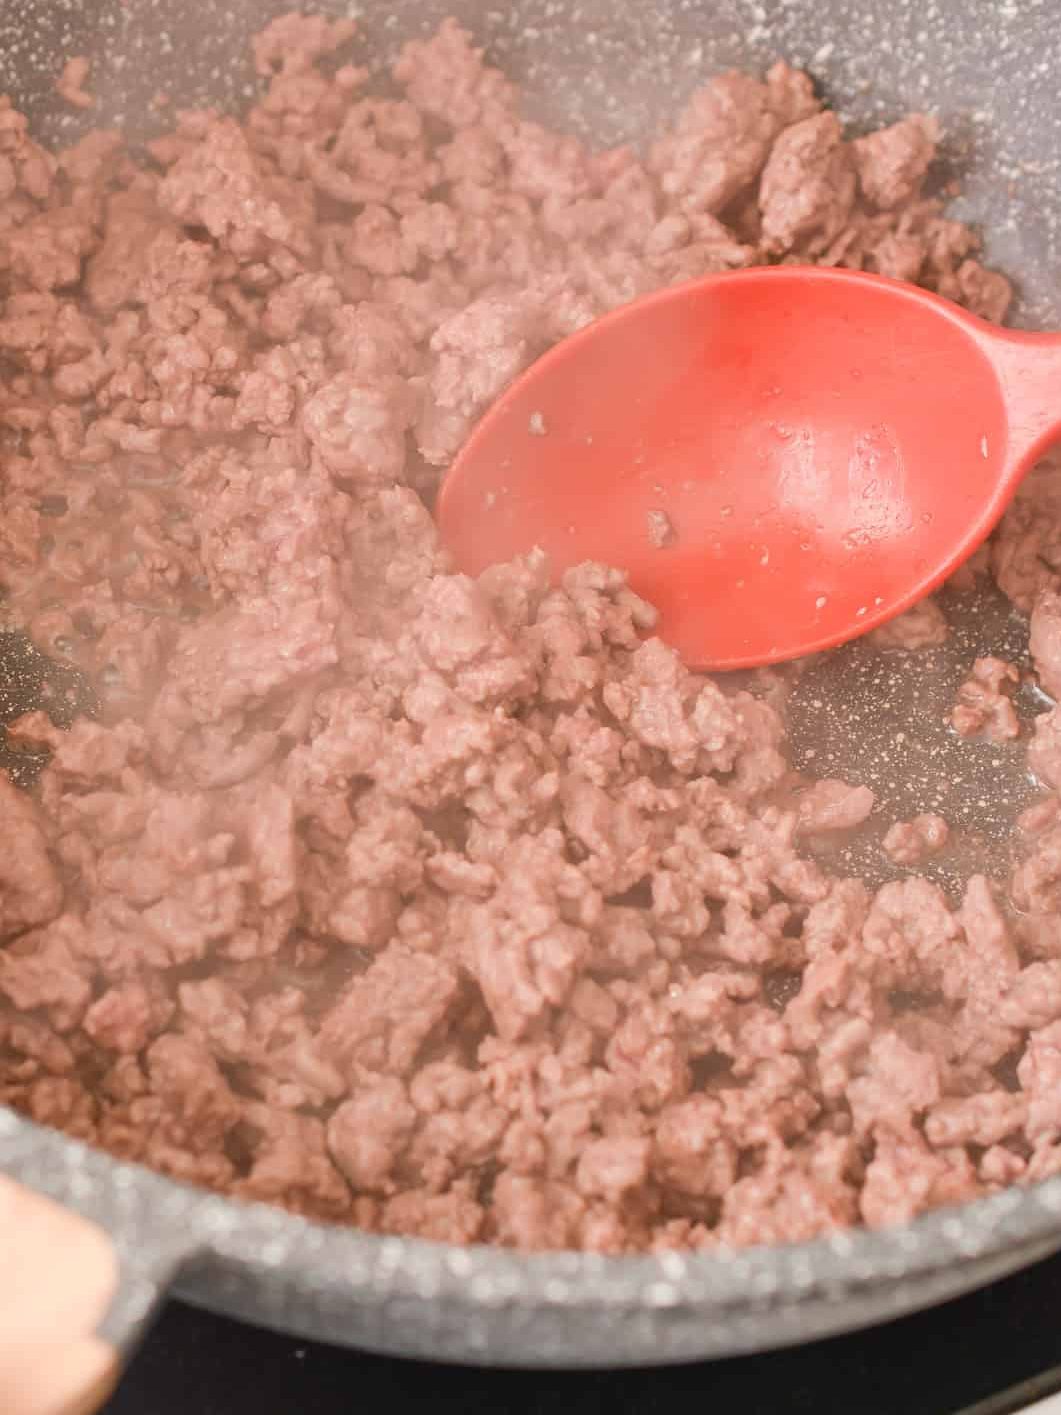 Add the 1 lb of ground beef to a skillet over medium-high heat and cook until browned completely.